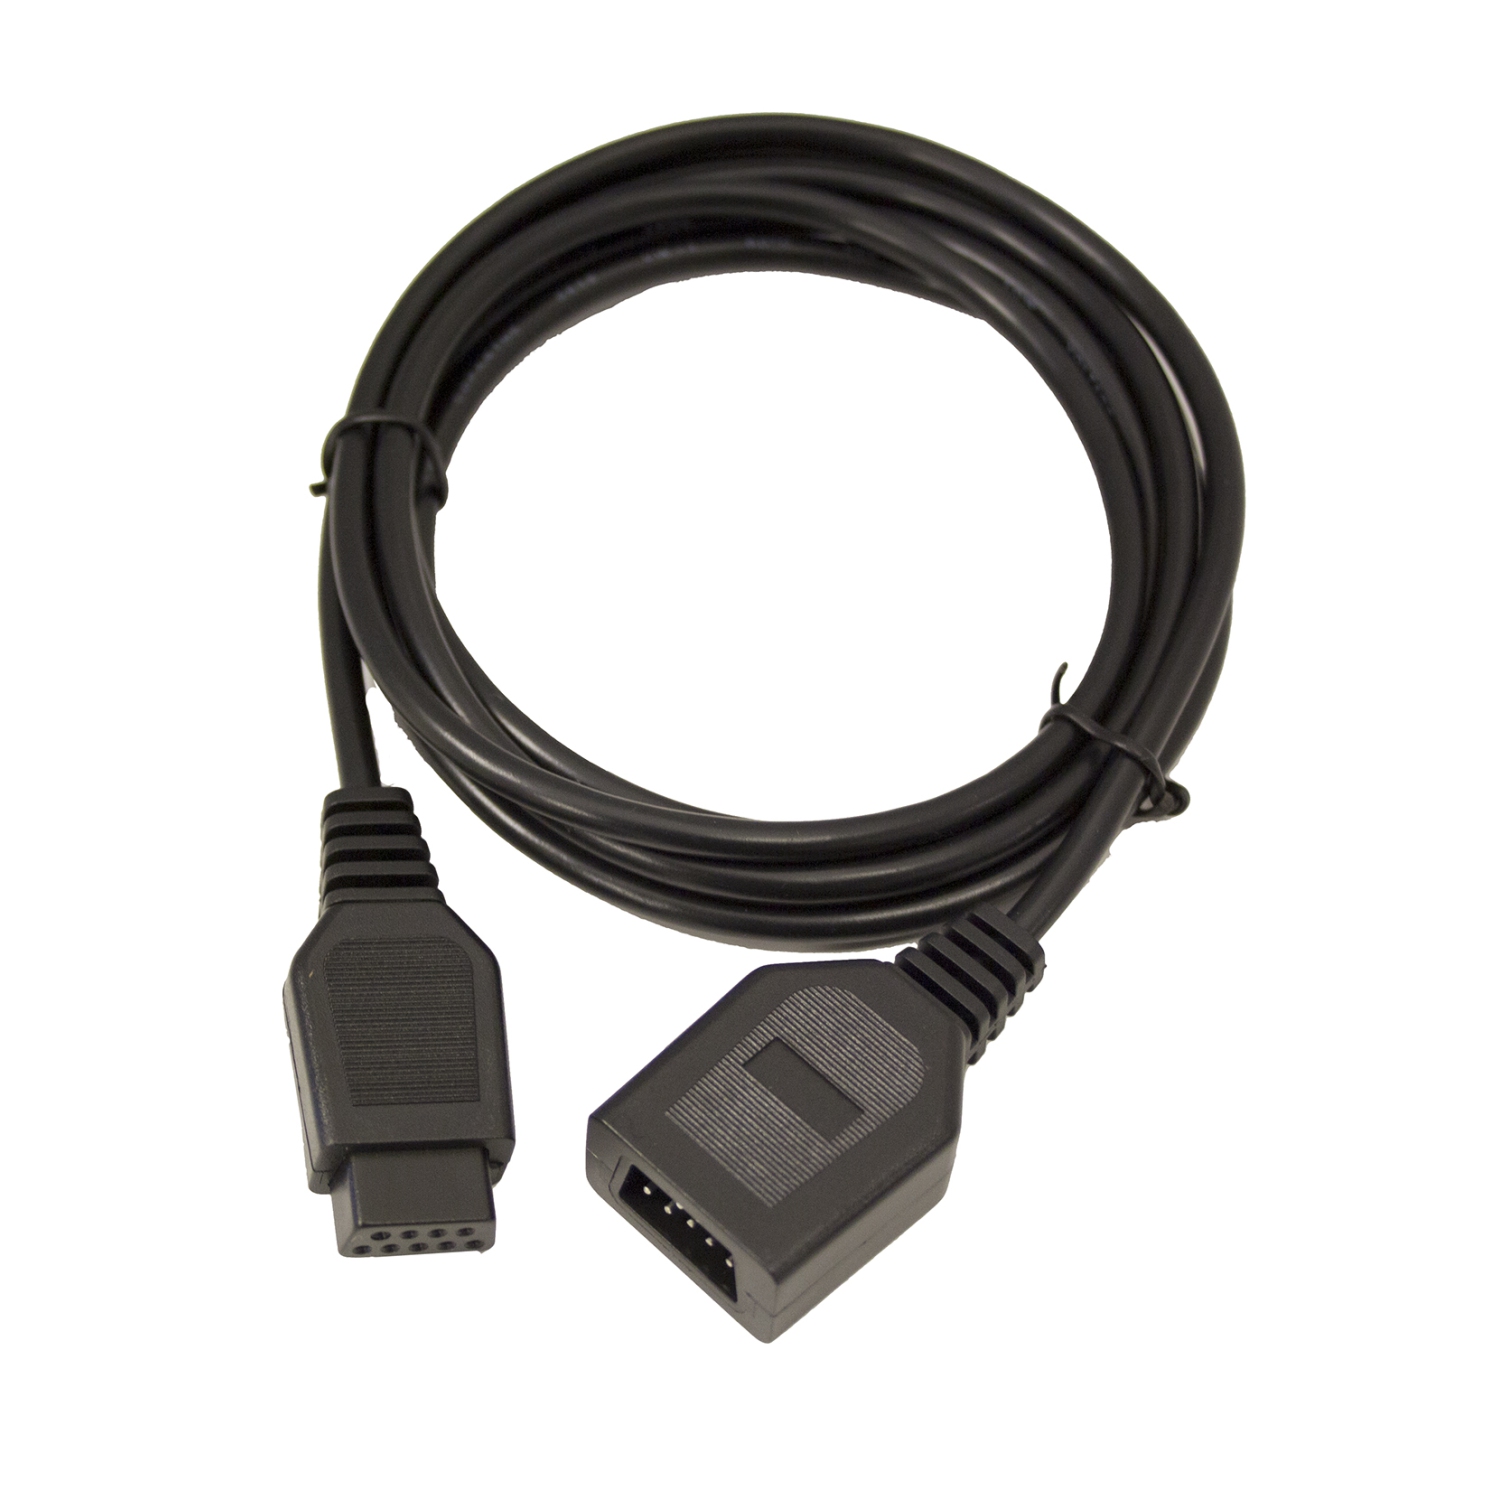 Extension Cord Cable For Sega Genesis 2/3 Controller by Mars Devices